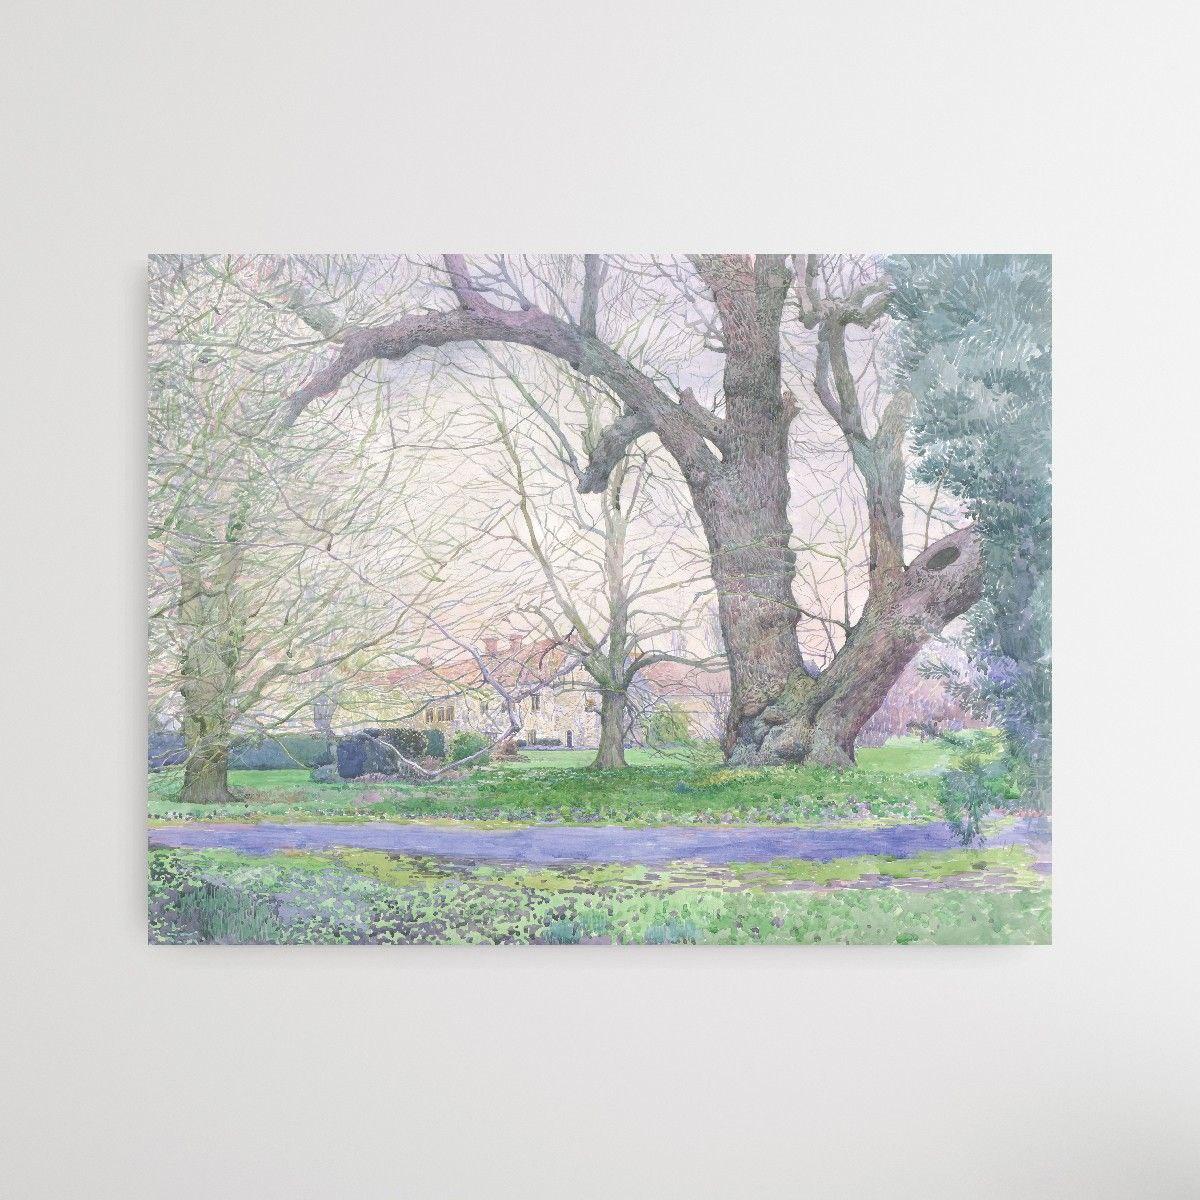 Notley Abbey in England Canvas Print by Simon Kozhin 70x90cm For Sale 12